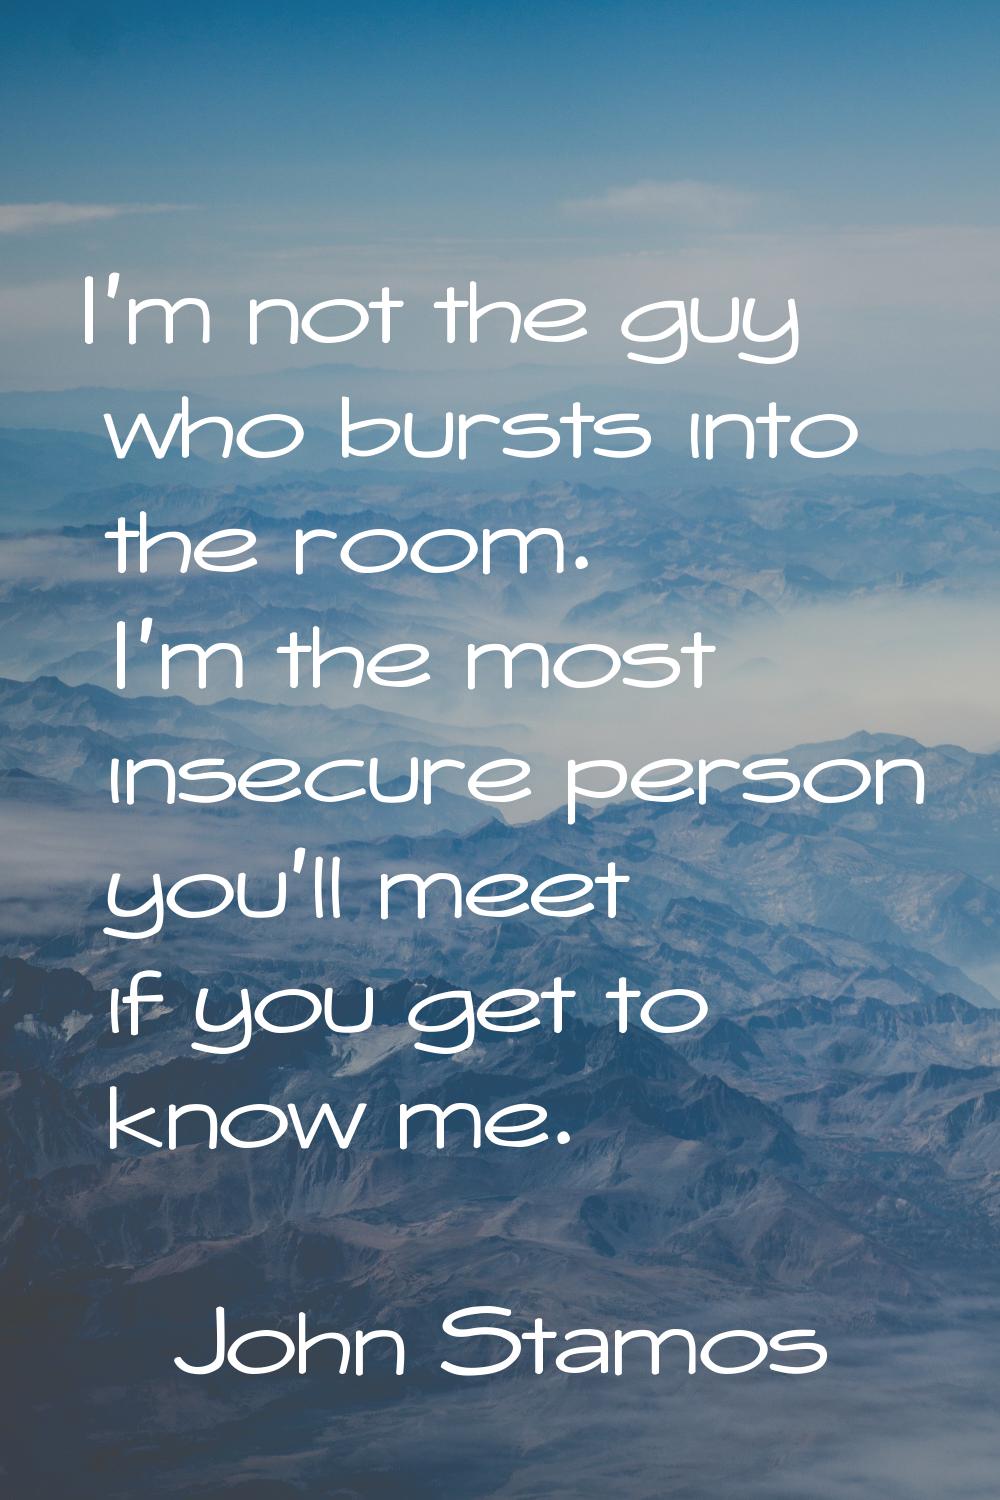 I'm not the guy who bursts into the room. I'm the most insecure person you'll meet if you get to kn